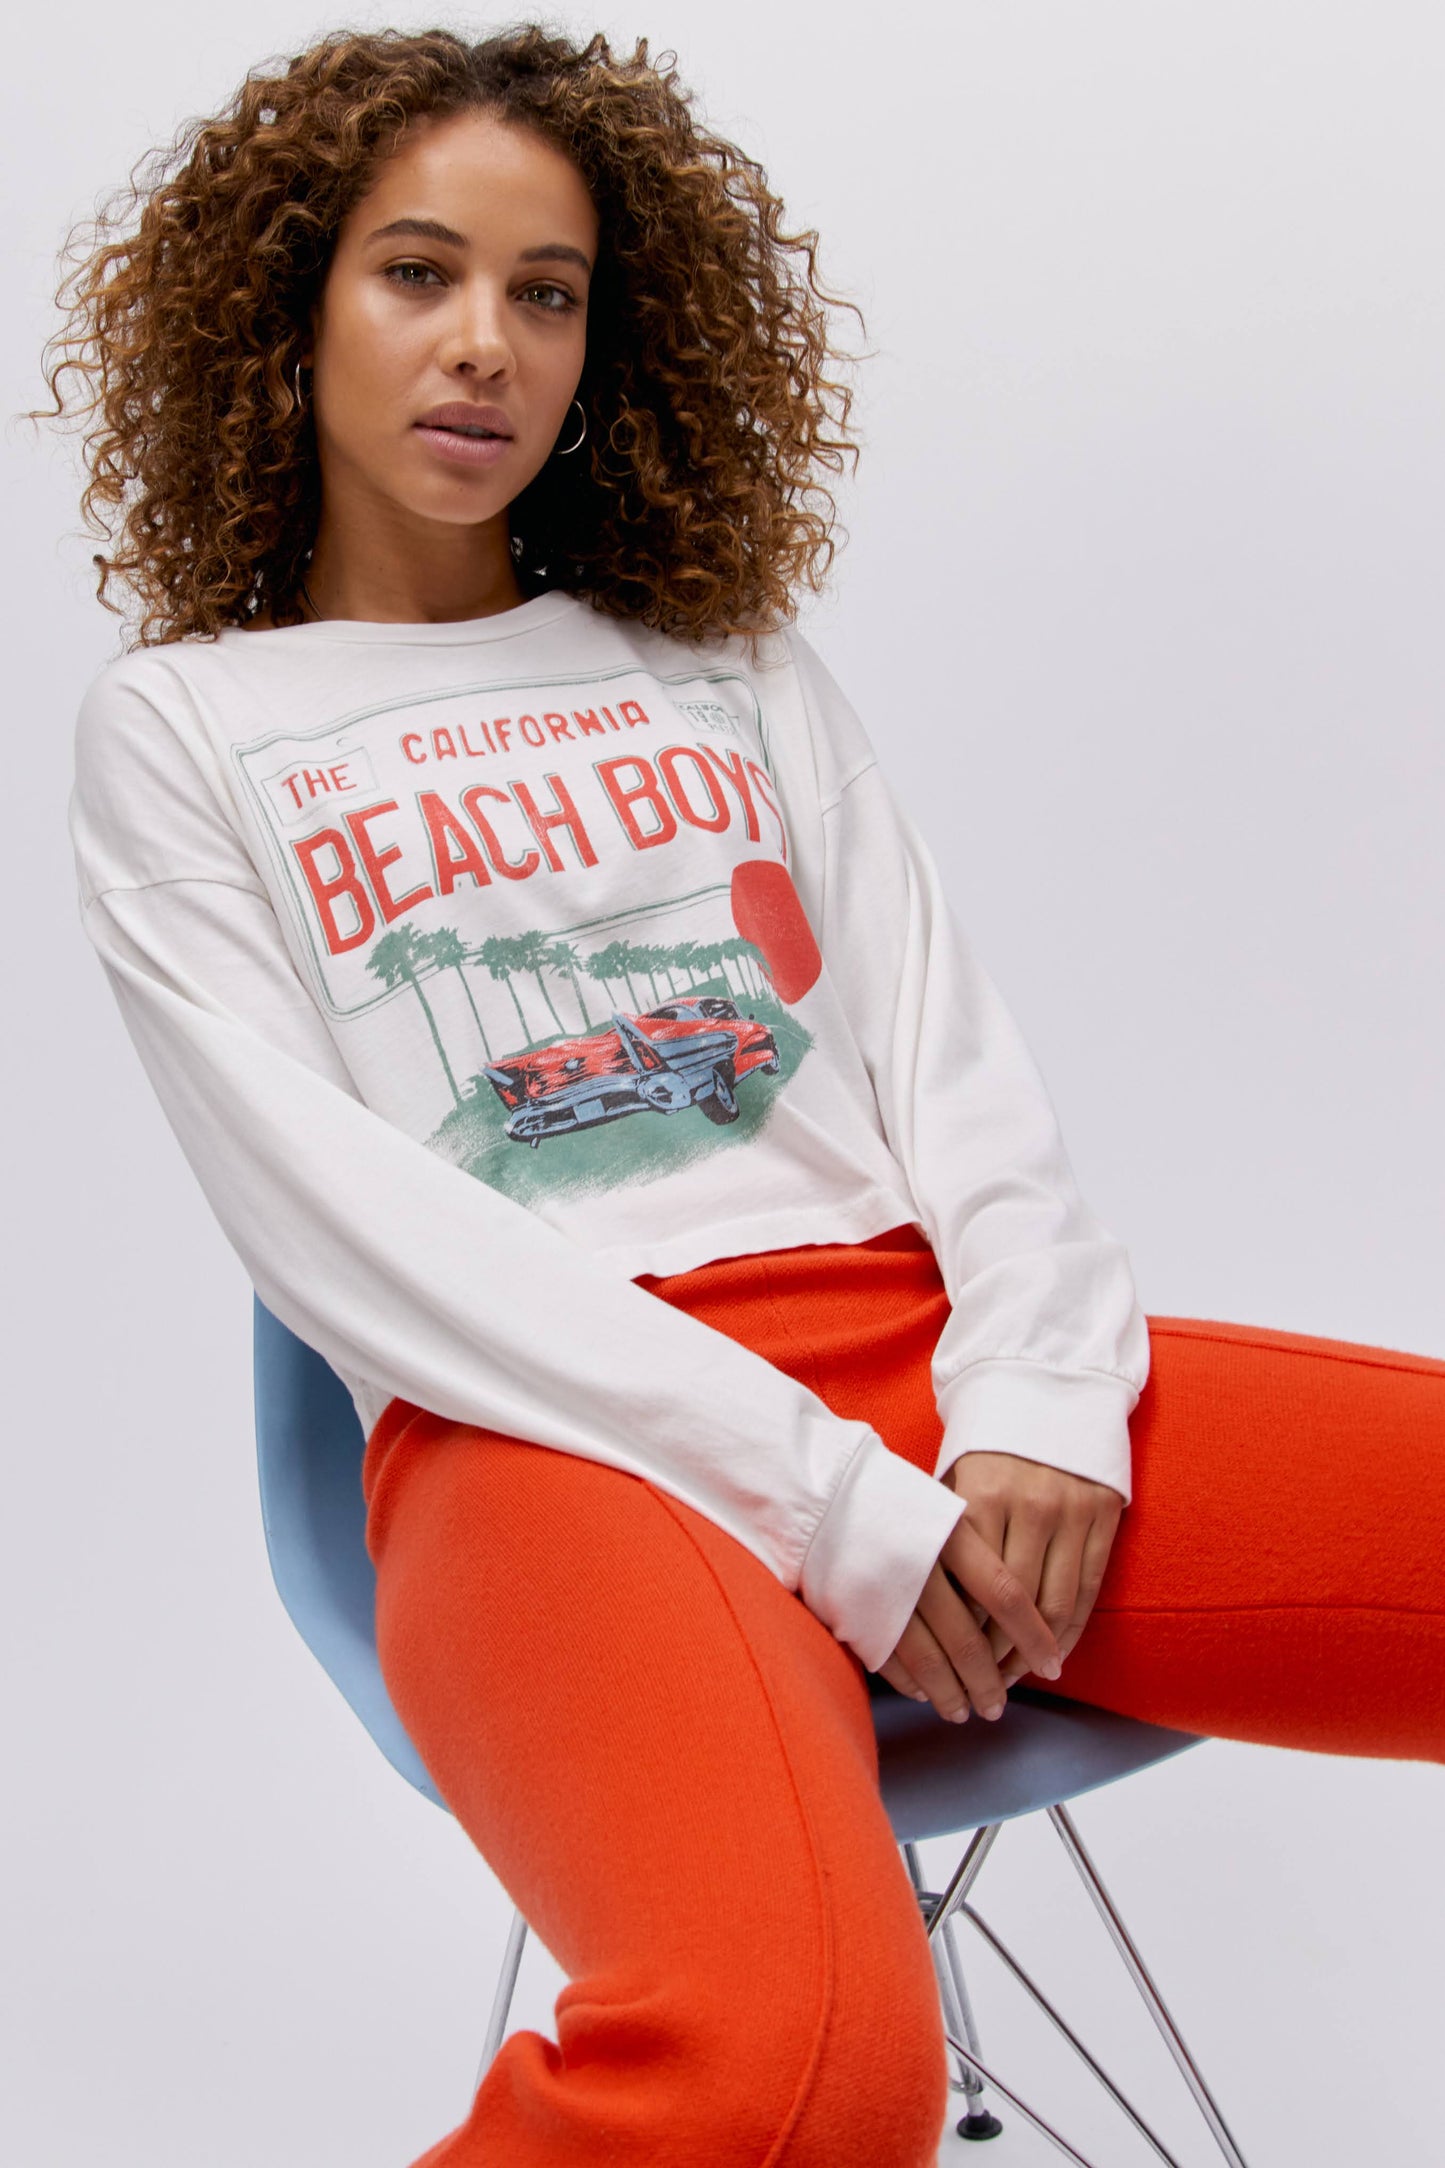 A curly-haired model featuring a white long sleeve stamped with "The Californa Beach Boys" and is desiged with a graphic of trees and cars on the center.